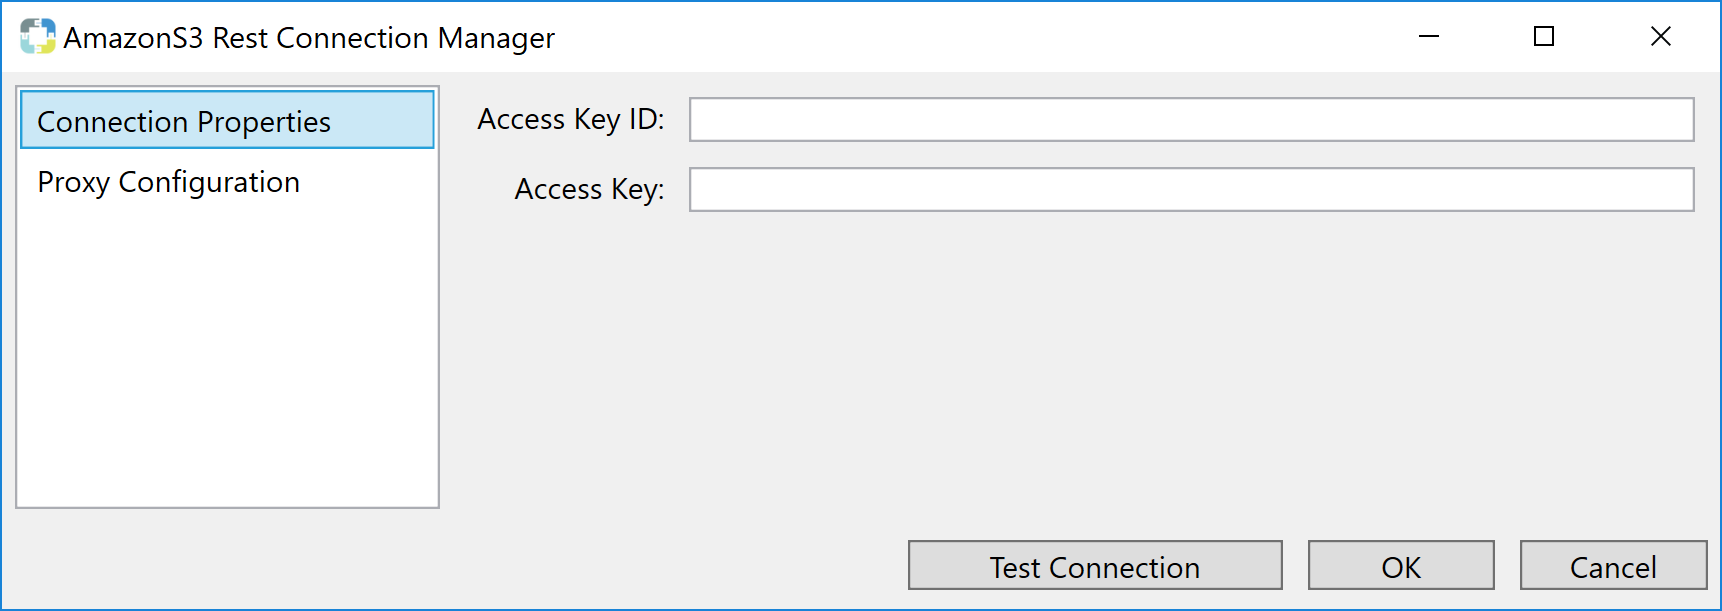 Task Factory Amazon S3 Rest Connection Manager Conection Properties